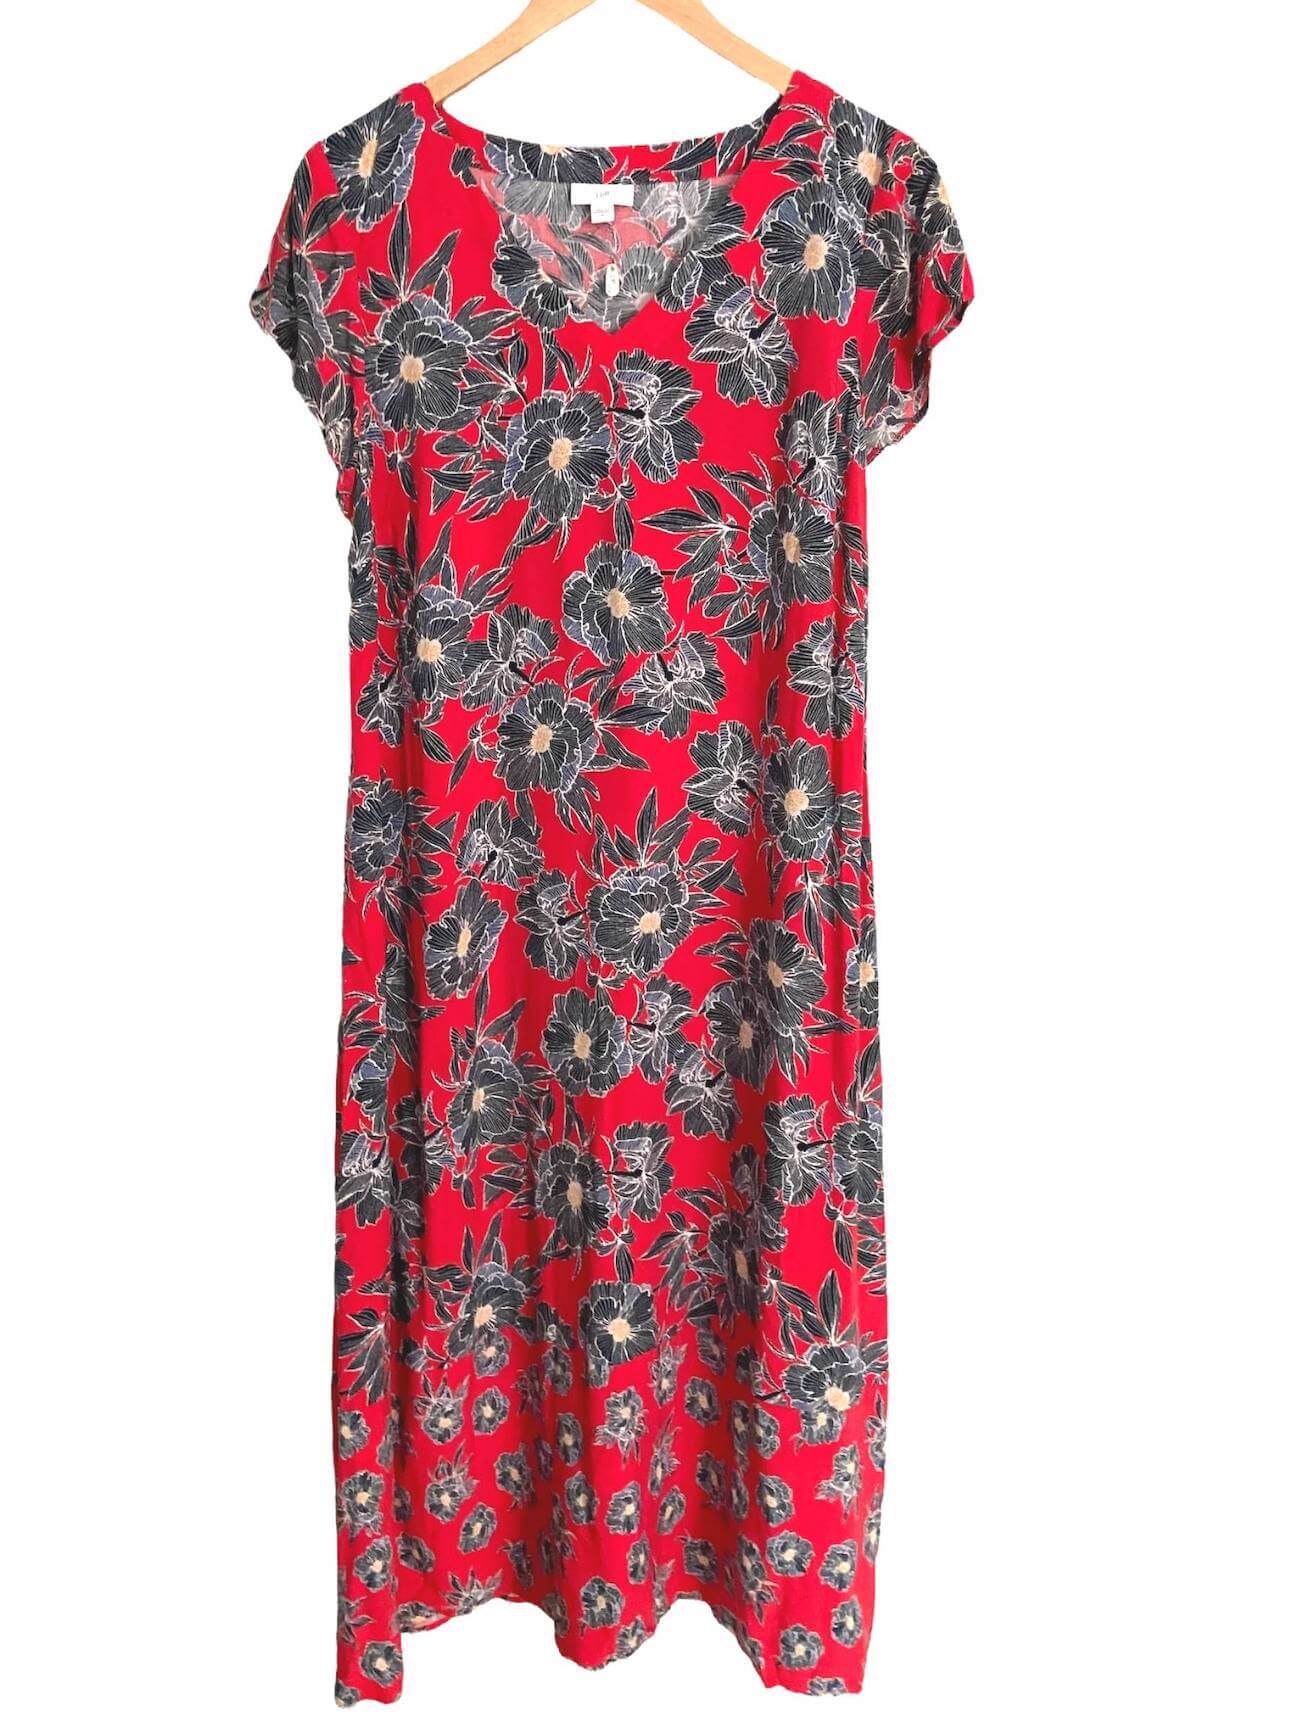 Cool Winter Red Floral Dress